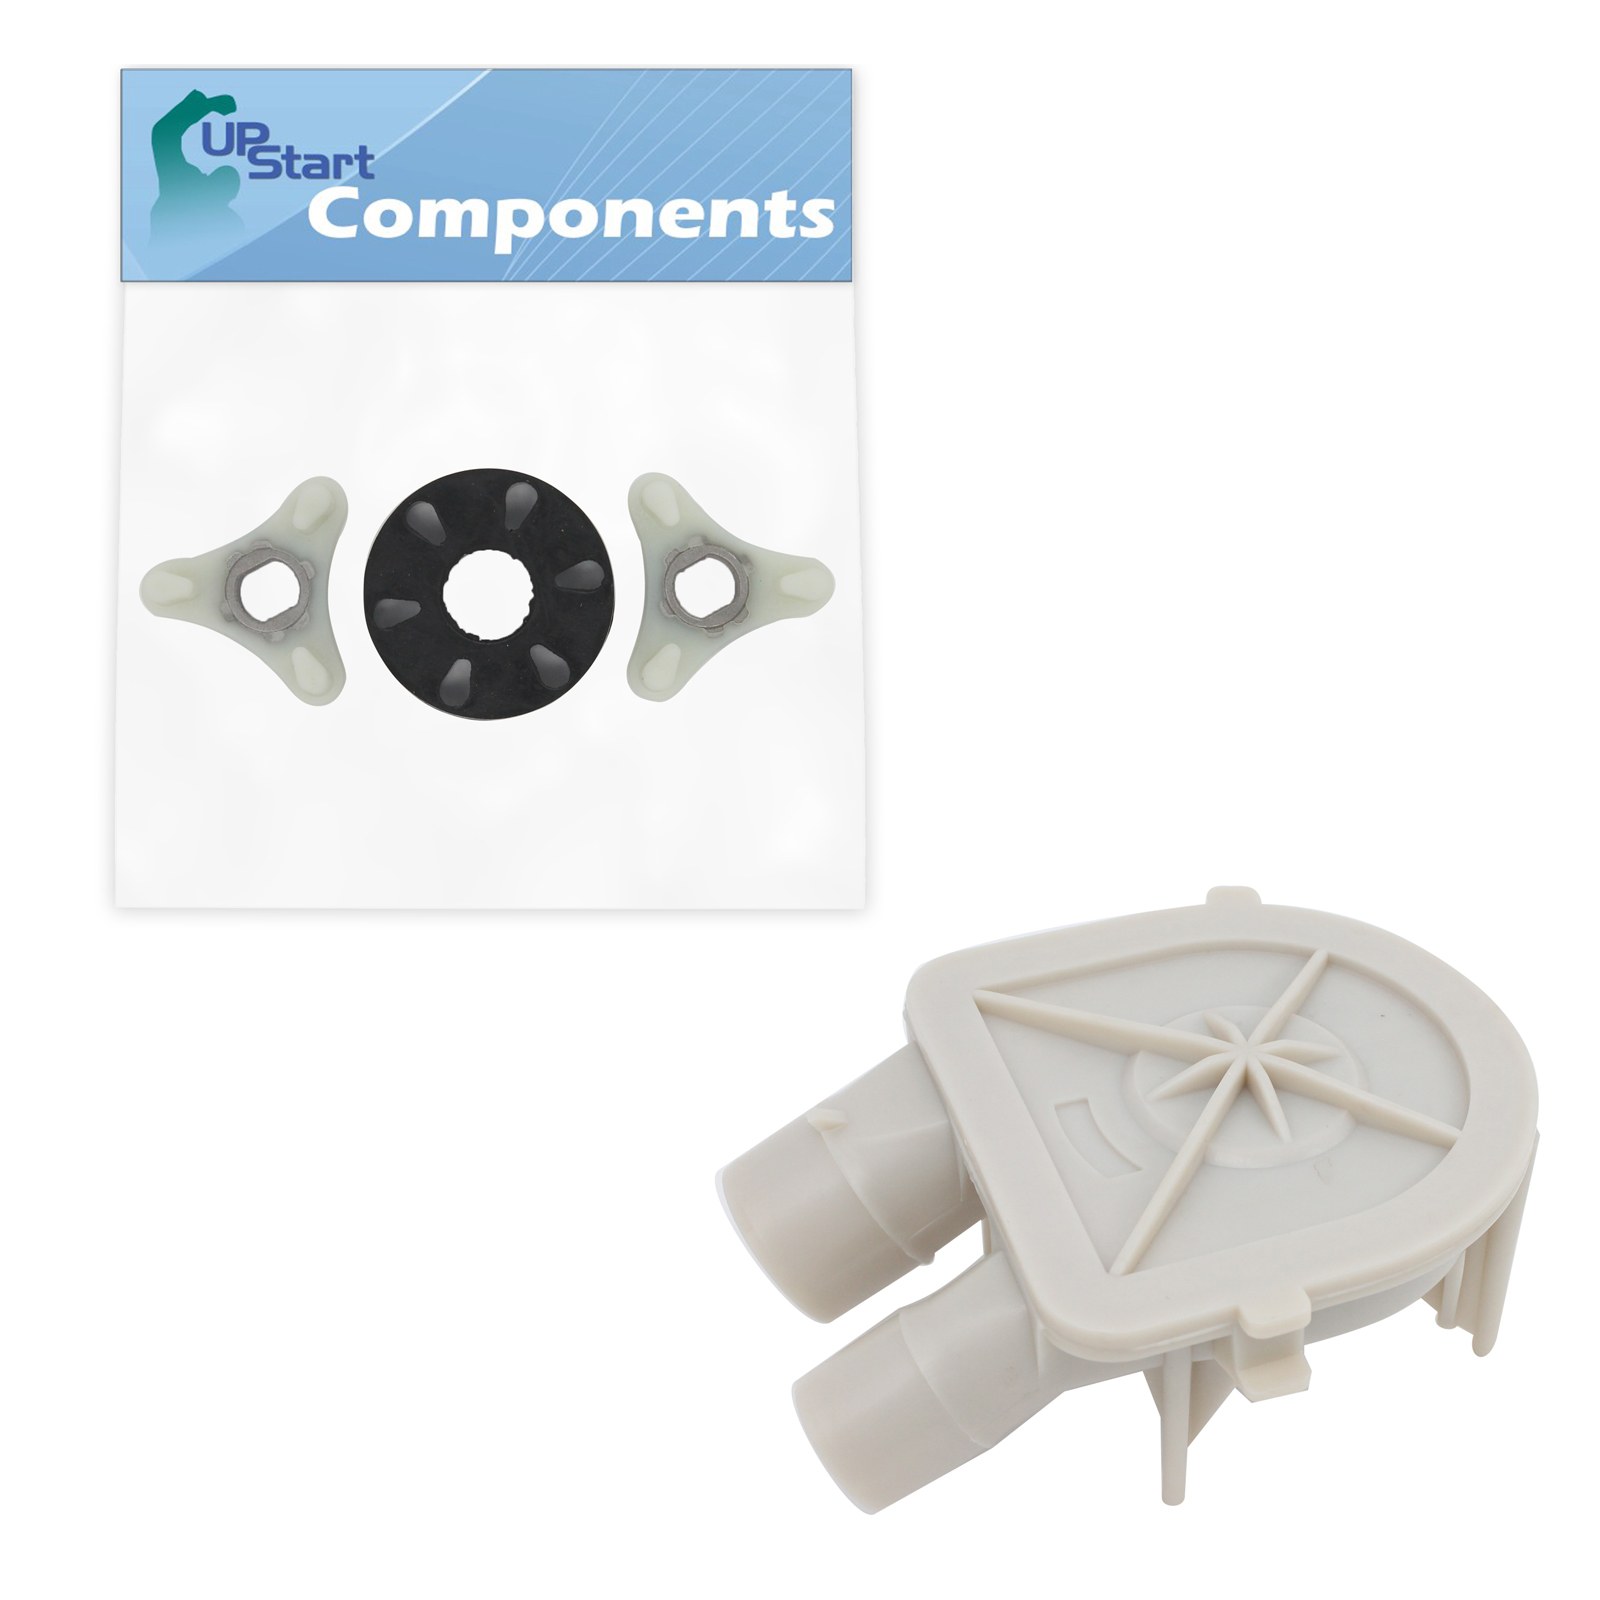 3363394 Washing Machine Pump & 285753A Washer Motor Coupler Replacement for Kenmore / Sears 11082694810 Washer - Compatible with WP3363394 Water Pump Assembly & 285753A Motor Coupling Kit - image 1 of 4